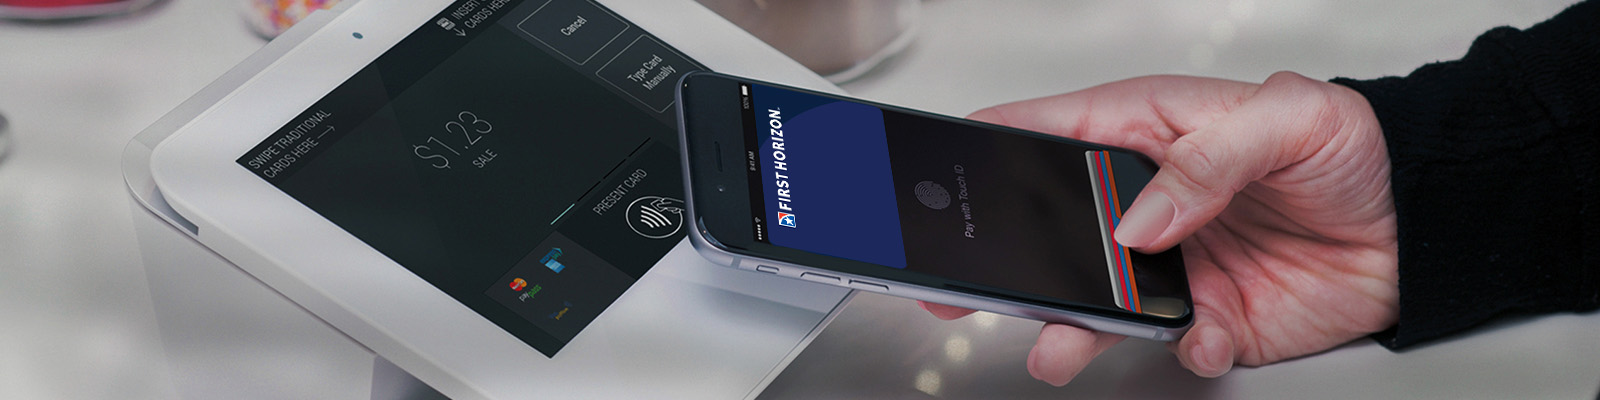 Apple Pay is simple to use and works with the devices you use every day.